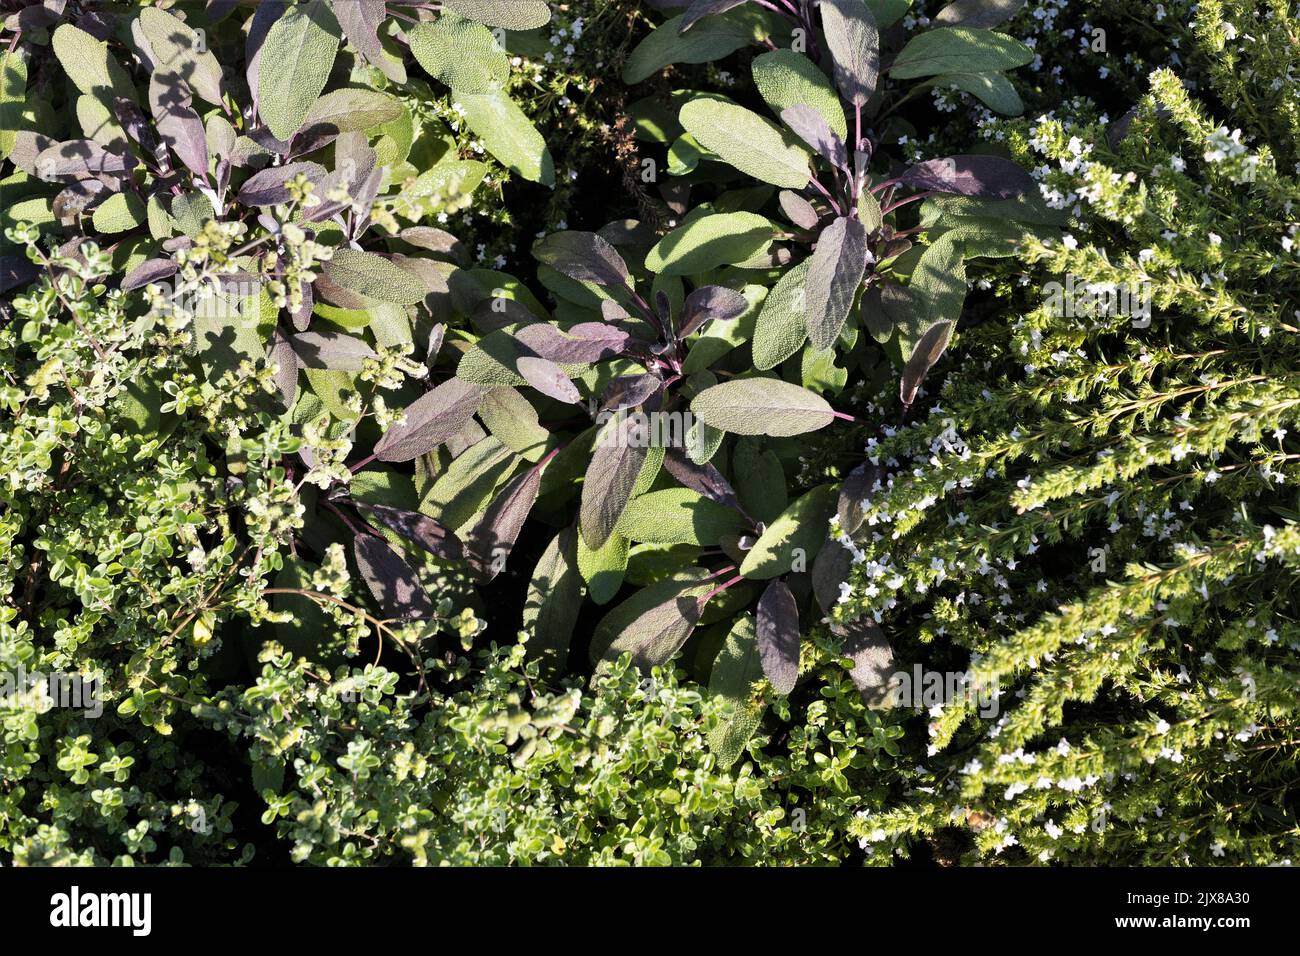 Greek oregano, purple sage, and winter savory, together in an herb garden. Stock Photo